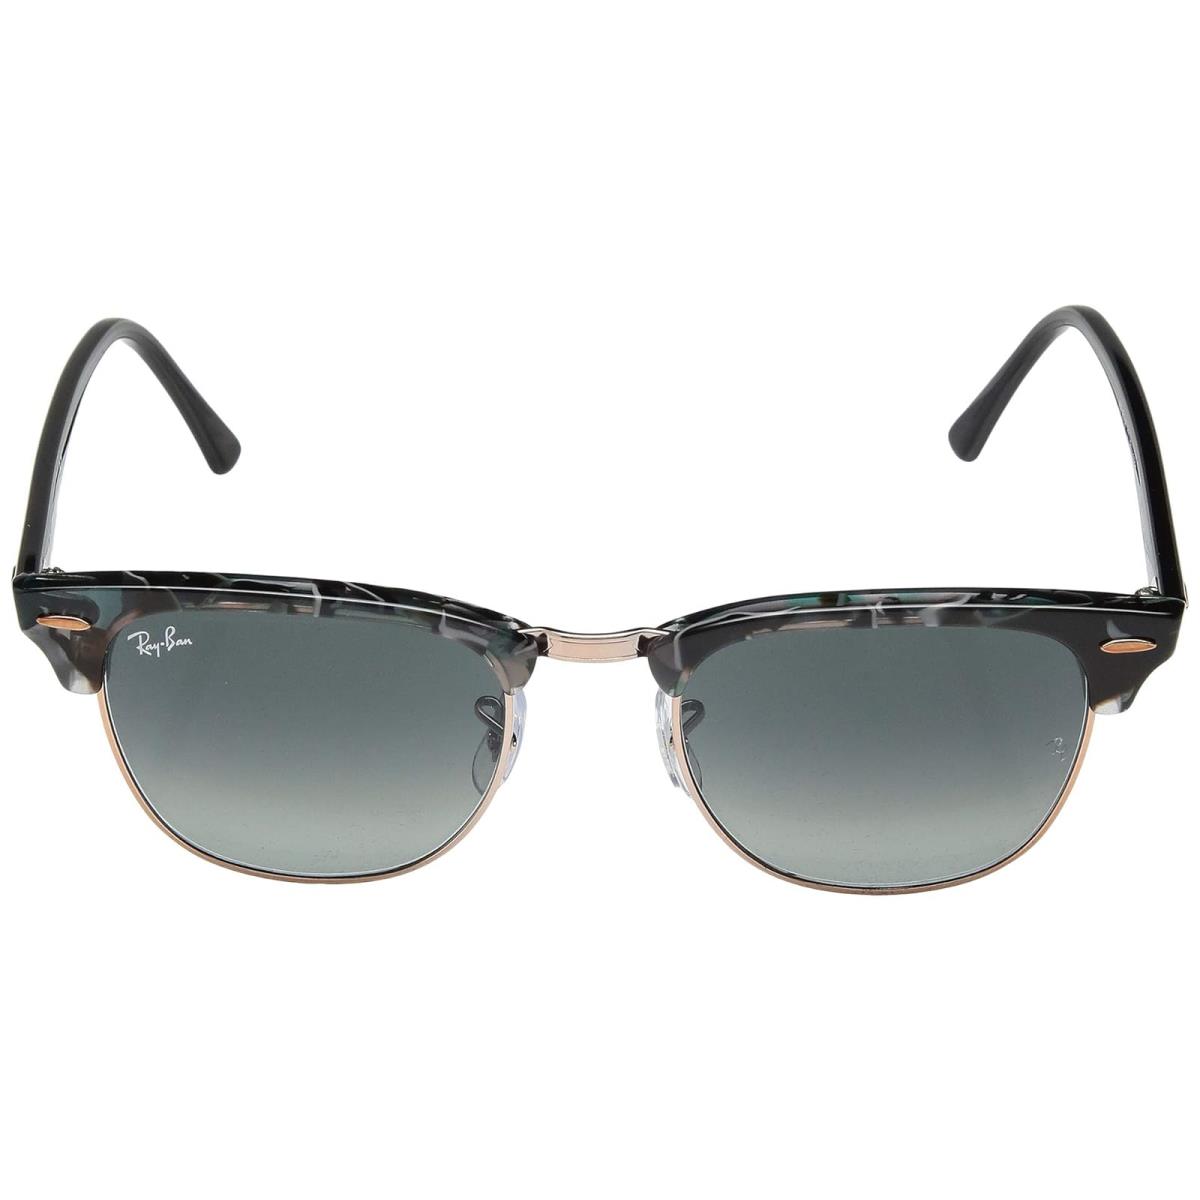 Man`s Sunglasses Ray-ban RB3016 Clubmaster Gradient Sunglasses - Spotted Grey/Green/Grey Gradient, Frame: Multicolor